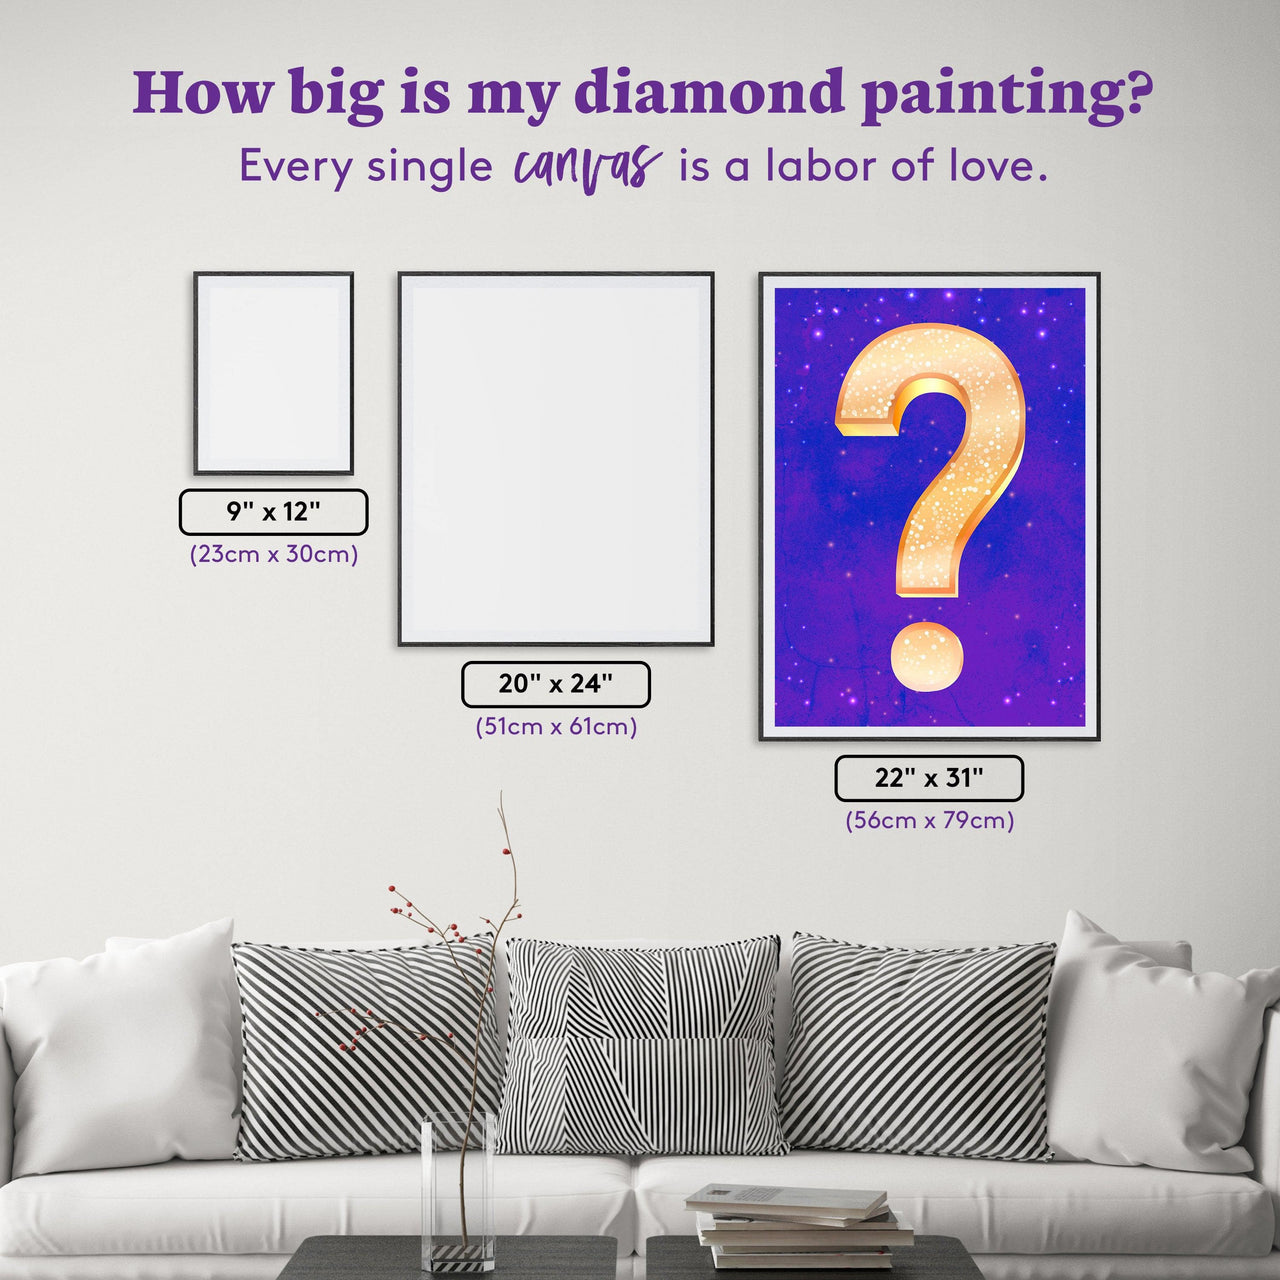 Diamond Painting Mystery Kit - Fantasy (Variety) 22" x 31" (56cm x 79cm) / Square With 48 Colors Including 4 ABs / 68,952